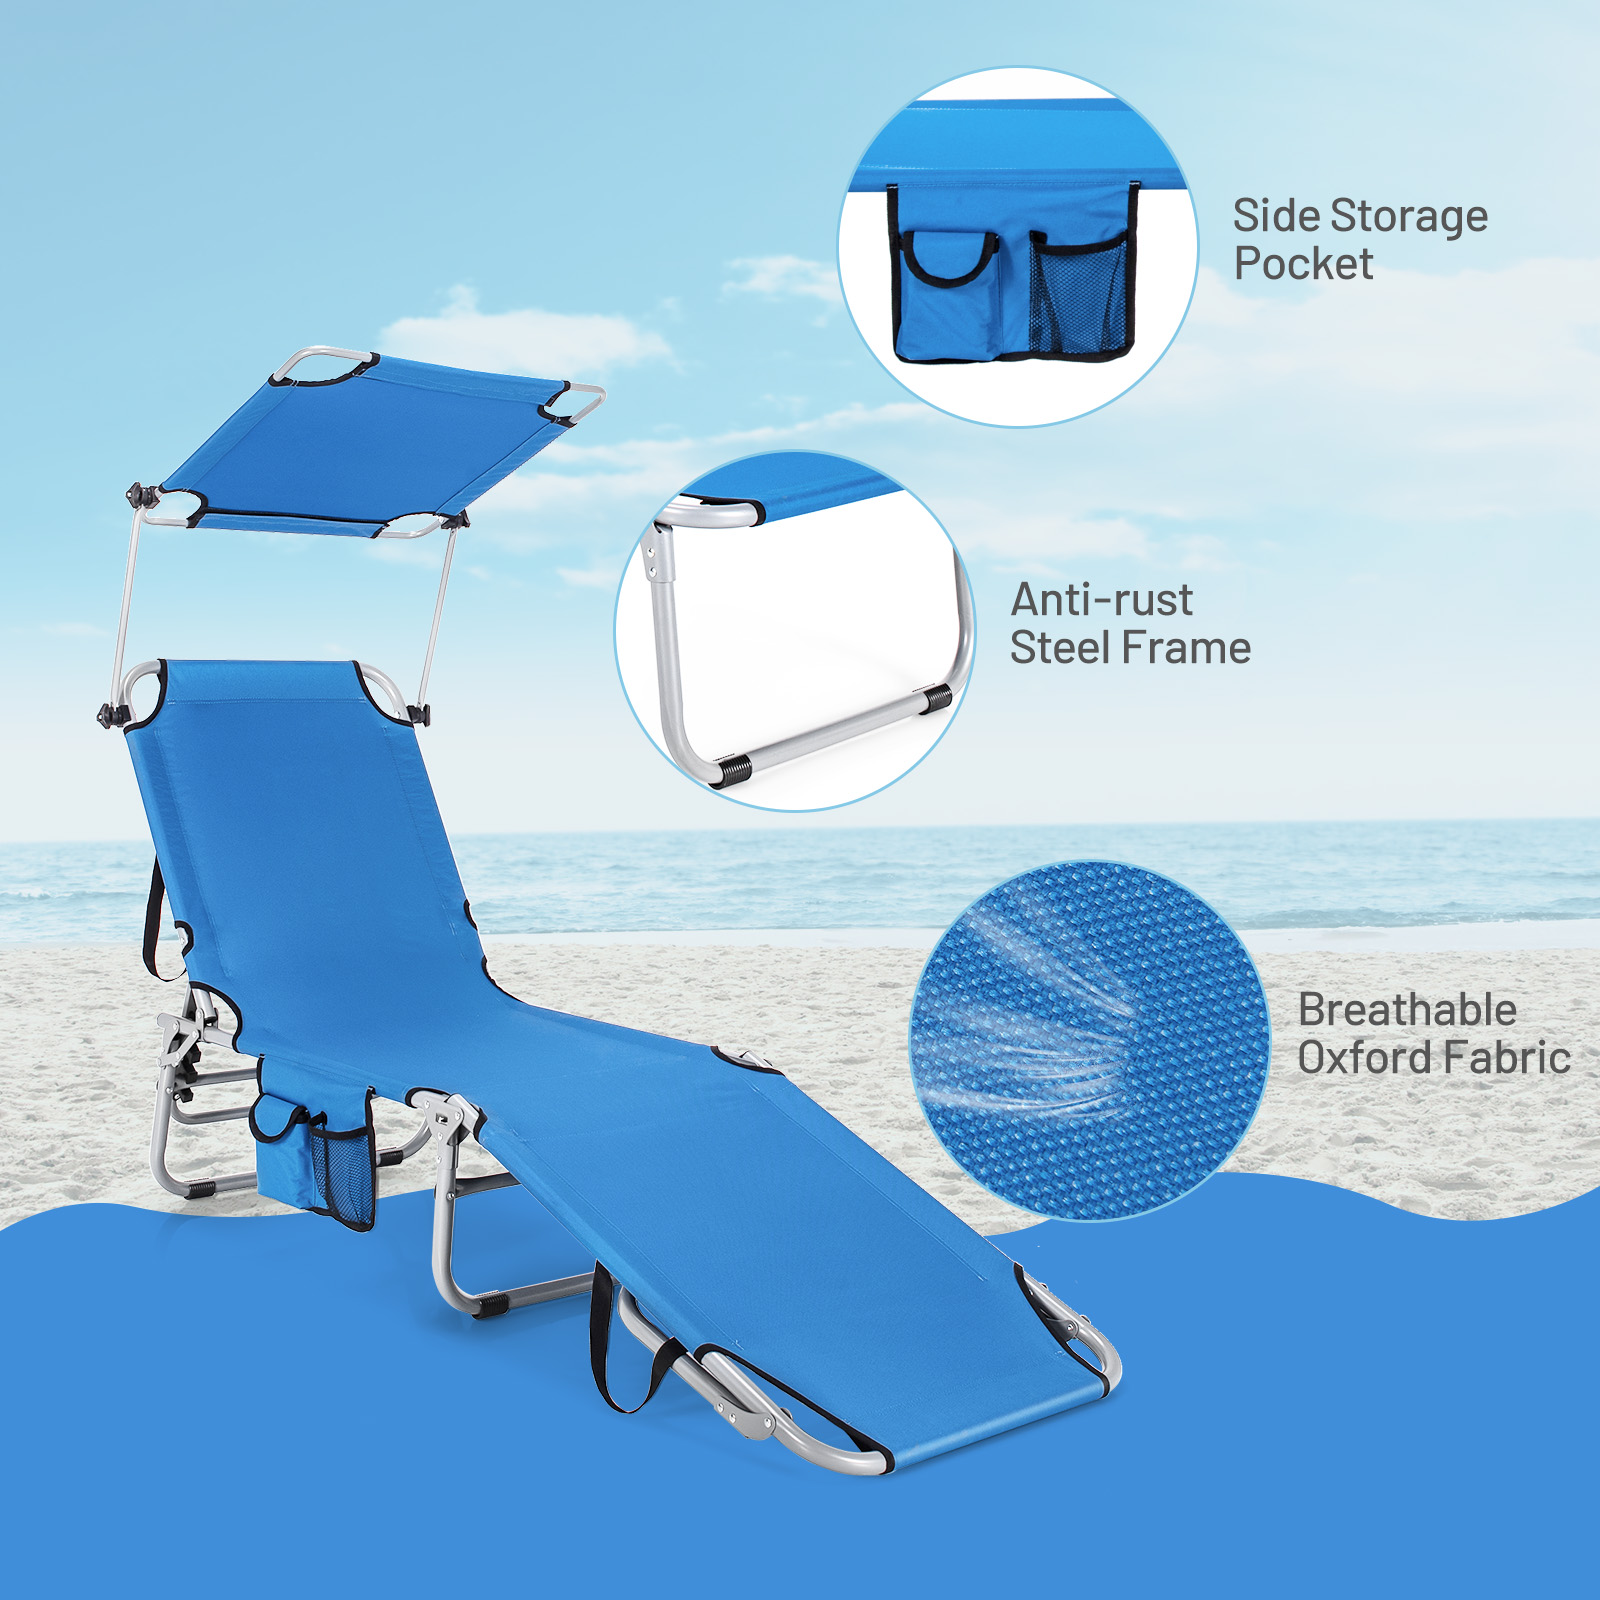 Topbuy Foldable Sun Shading Chaise Lounge Chair Adjustable Beach Recliner Blue - image 3 of 10